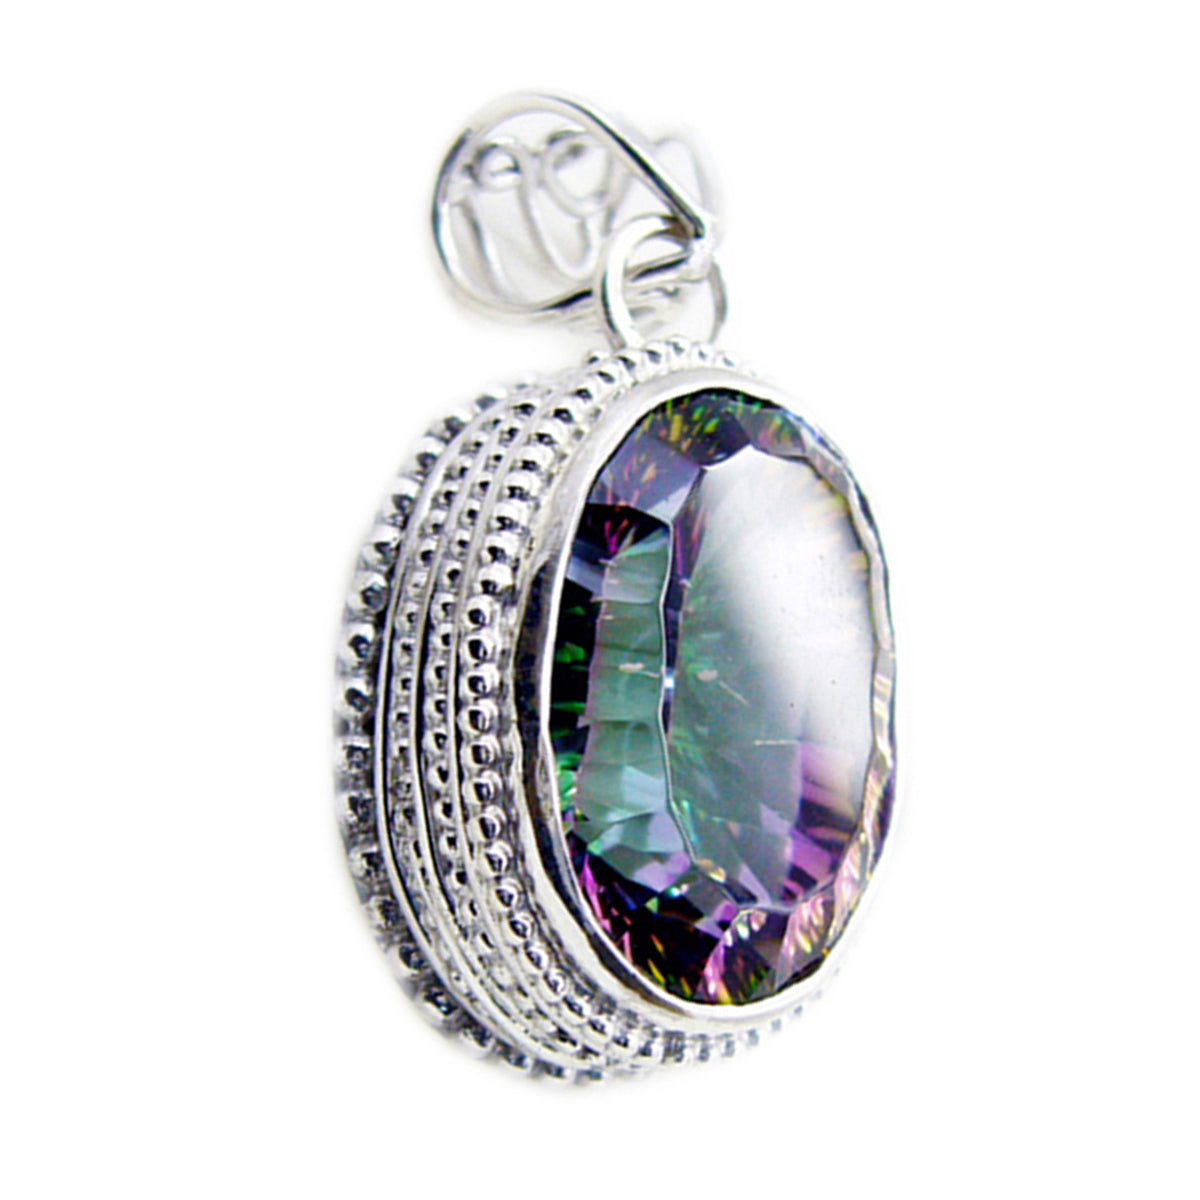 Riyo Charming Gemstone Oval Faceted Multi Color Mystic Quartz Sterling Silver Pendant Gift For Women